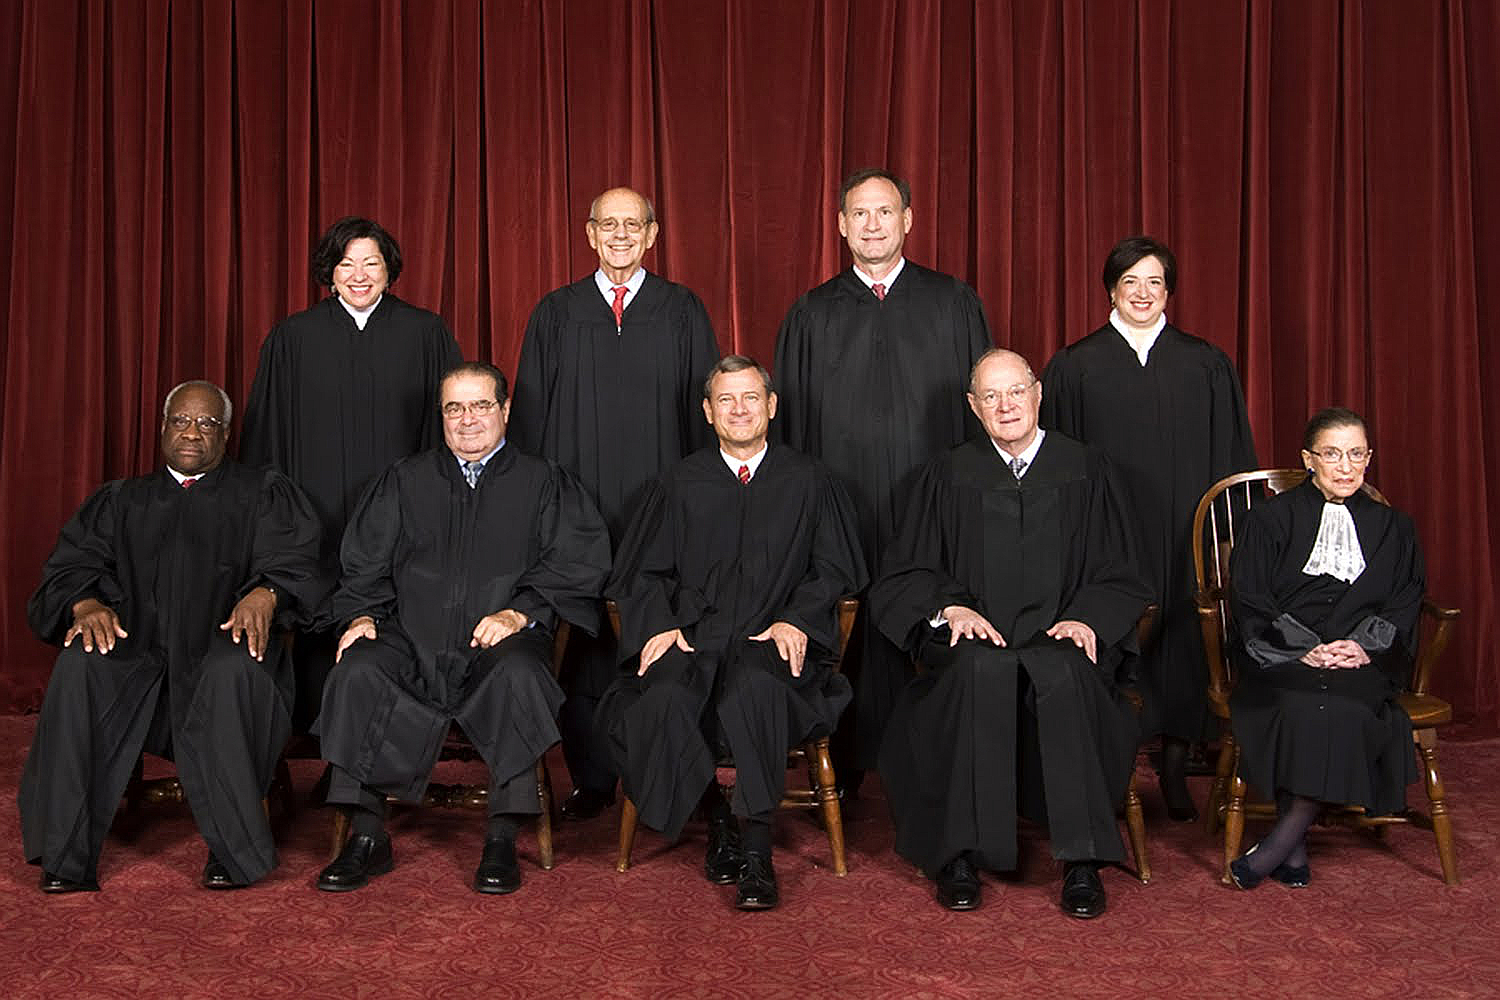 The Justices of the Supreme Court of the United States of America (Scalia has since passed away)   